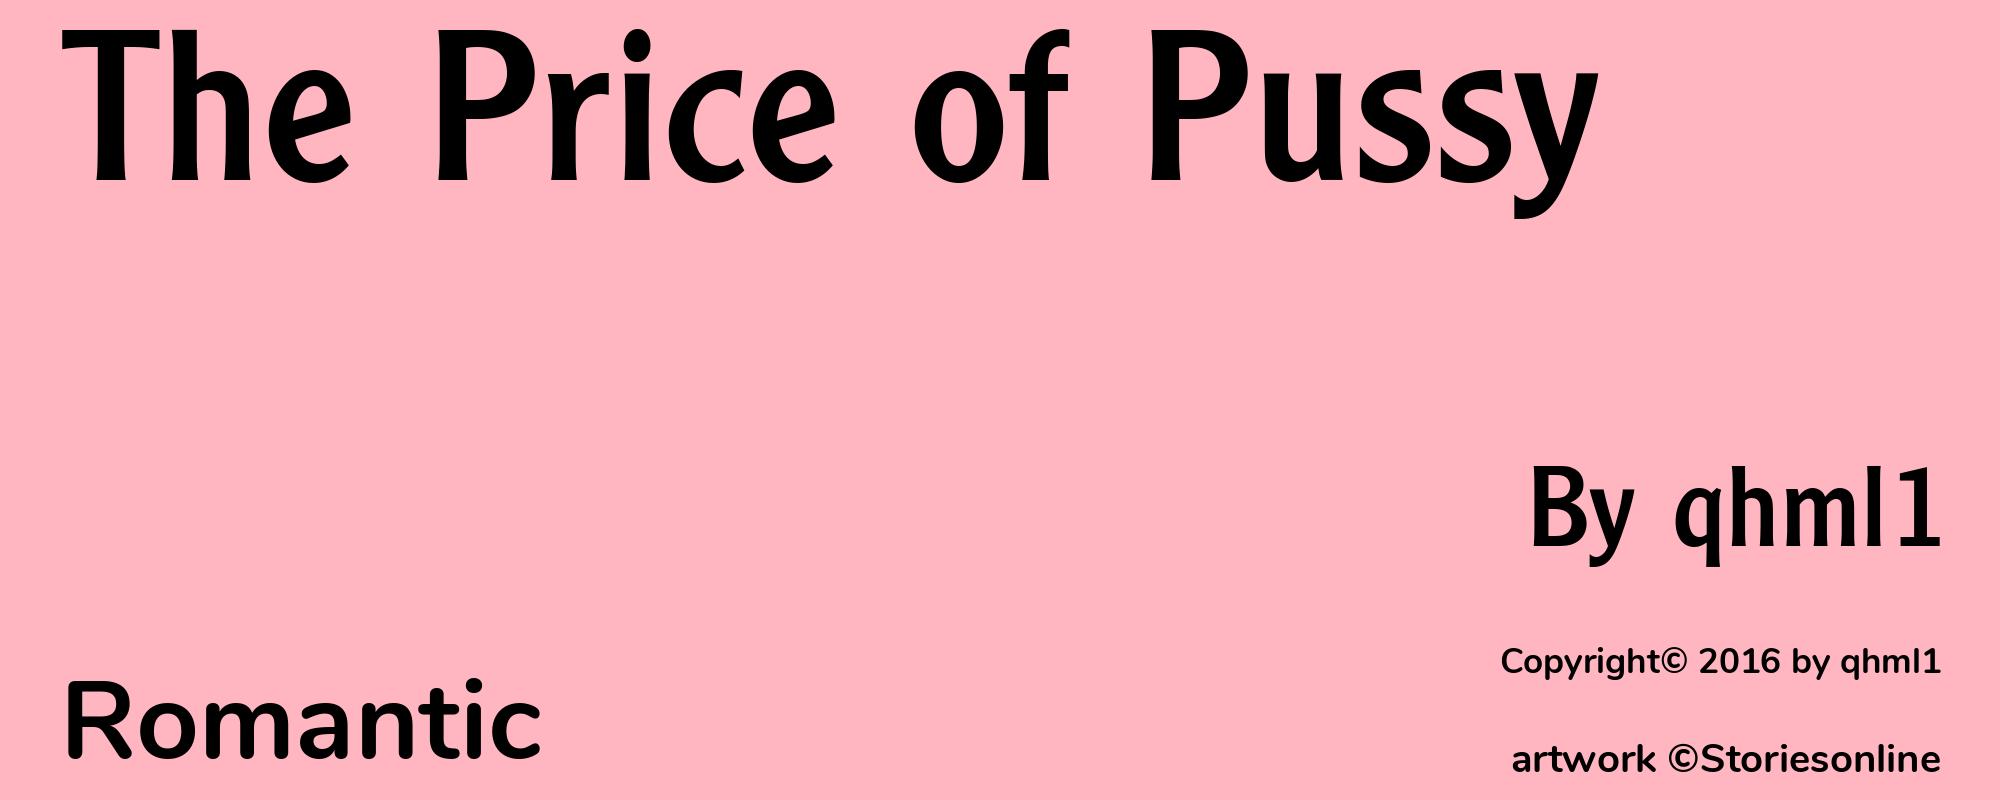 The Price of Pussy - Cover